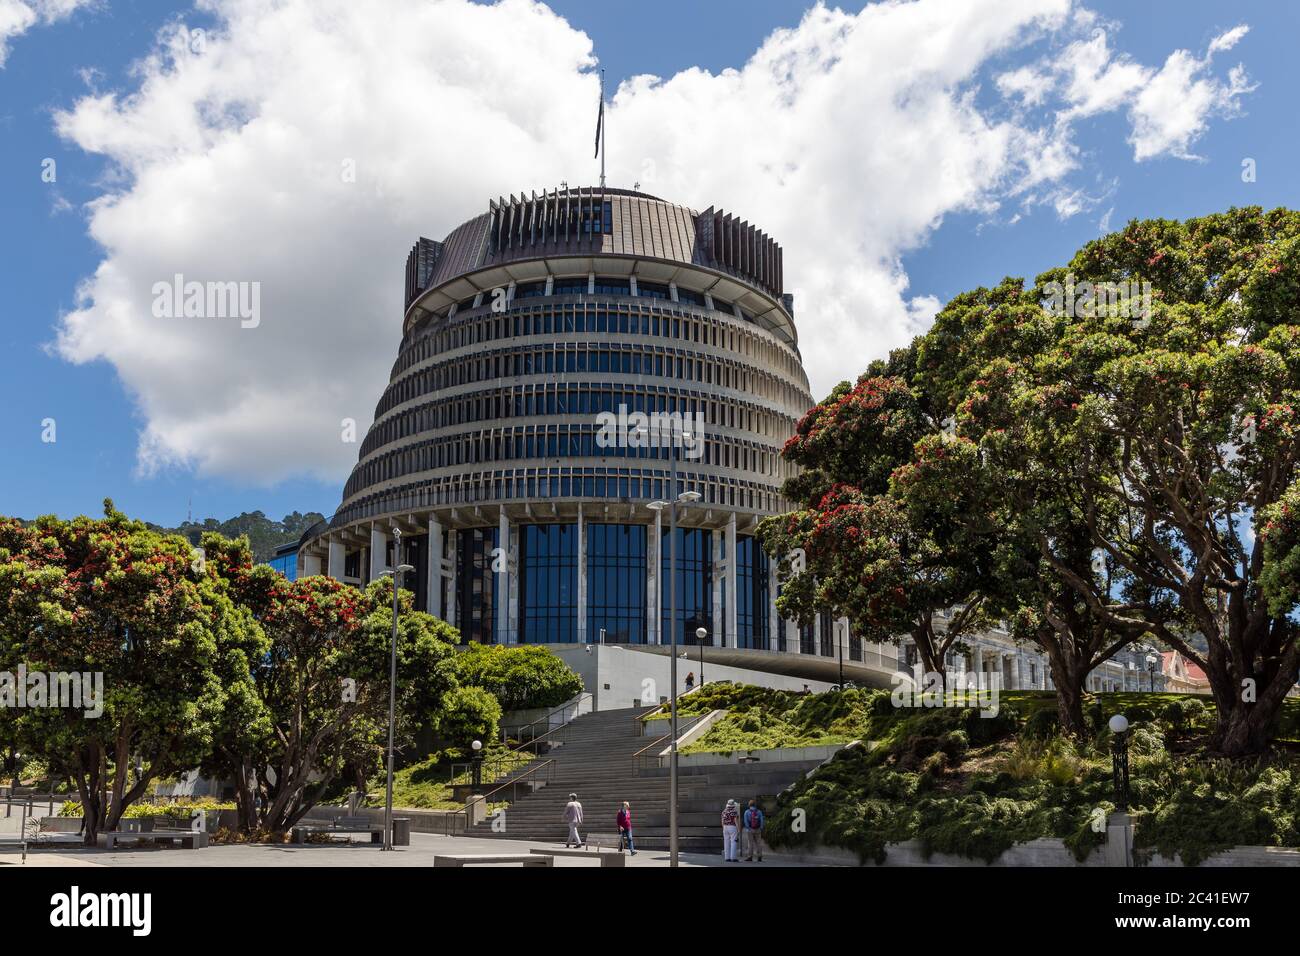 Wellington, New Zealand: 'Beehive' is the common name for the Executive Wing of the New Zealand Parliament Buildings. It was completed in 1981. Stock Photo